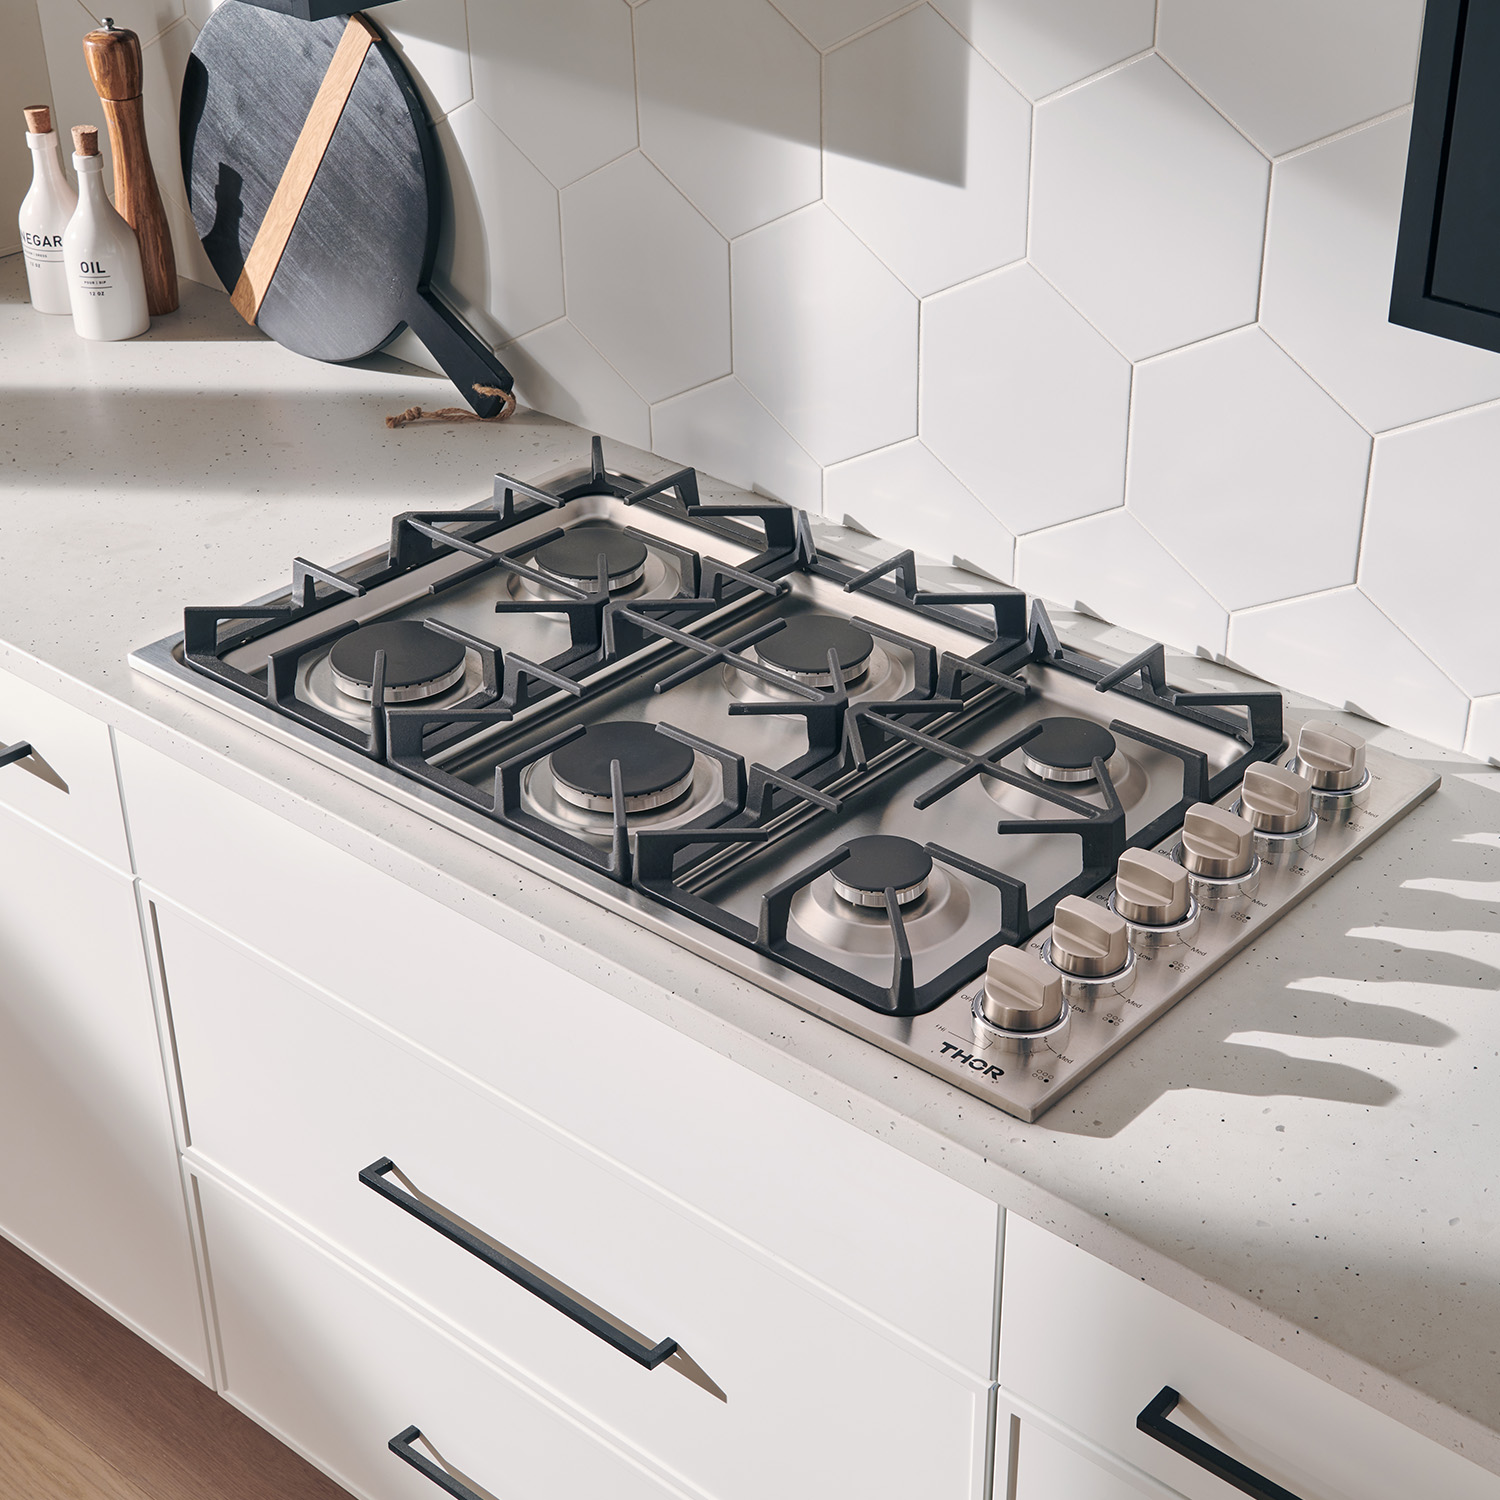 Kitchen Island Cooktop or Range: Which Is Best?